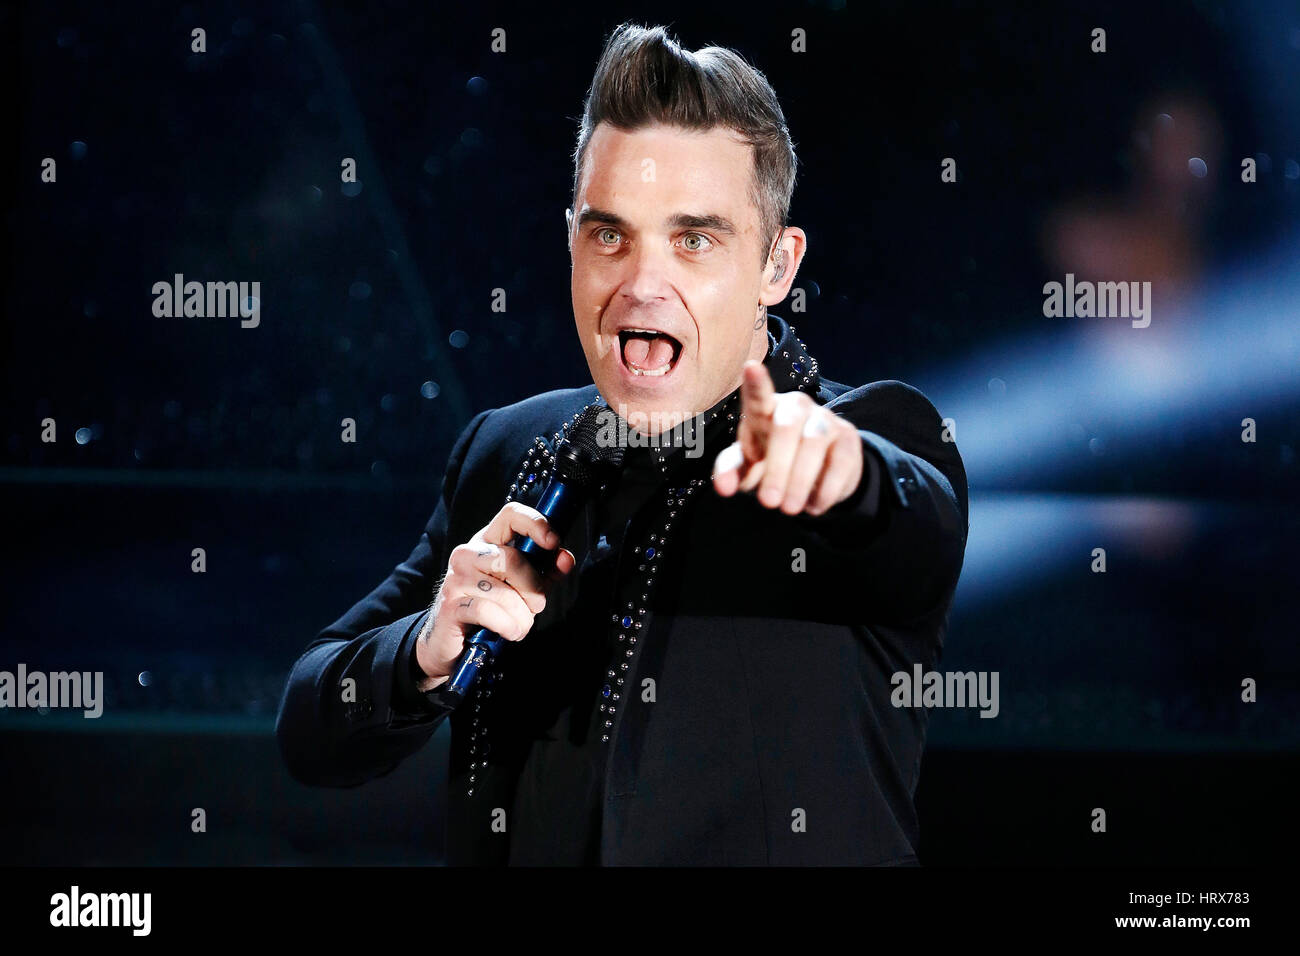 SANREMO, ITALY, February 8: Singer Robbie Williams performs during the 67th Sanremo Song Festival on February 8, 2017, in Sanremo, Italy. Stock Photo